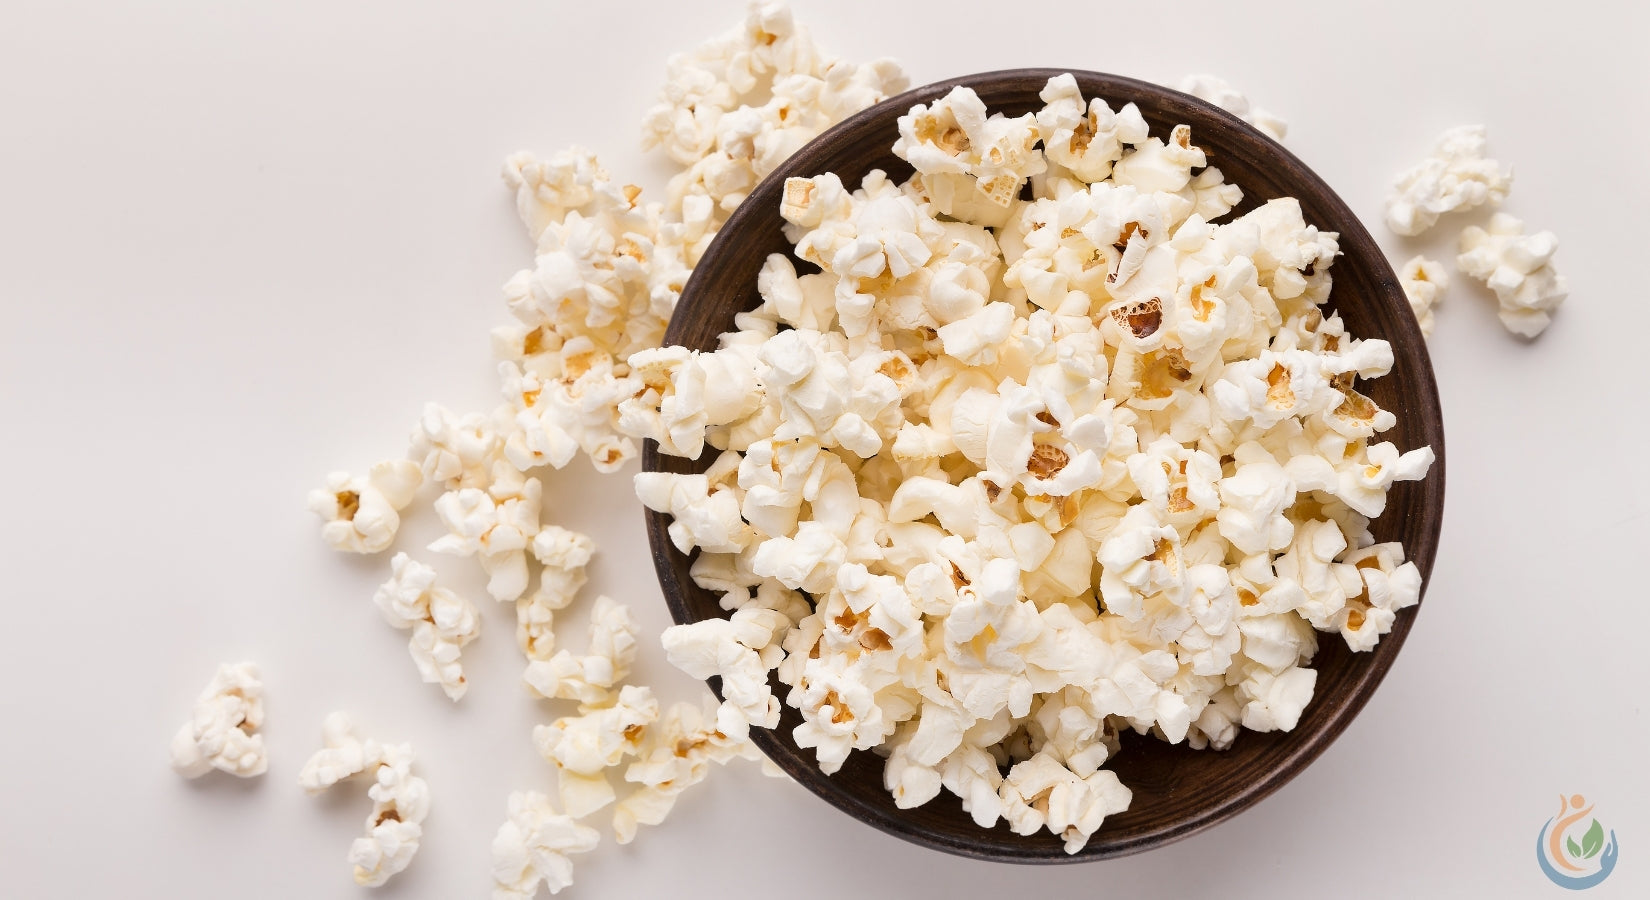 Buttered popcorn spilling out of a brown bowl on a white table